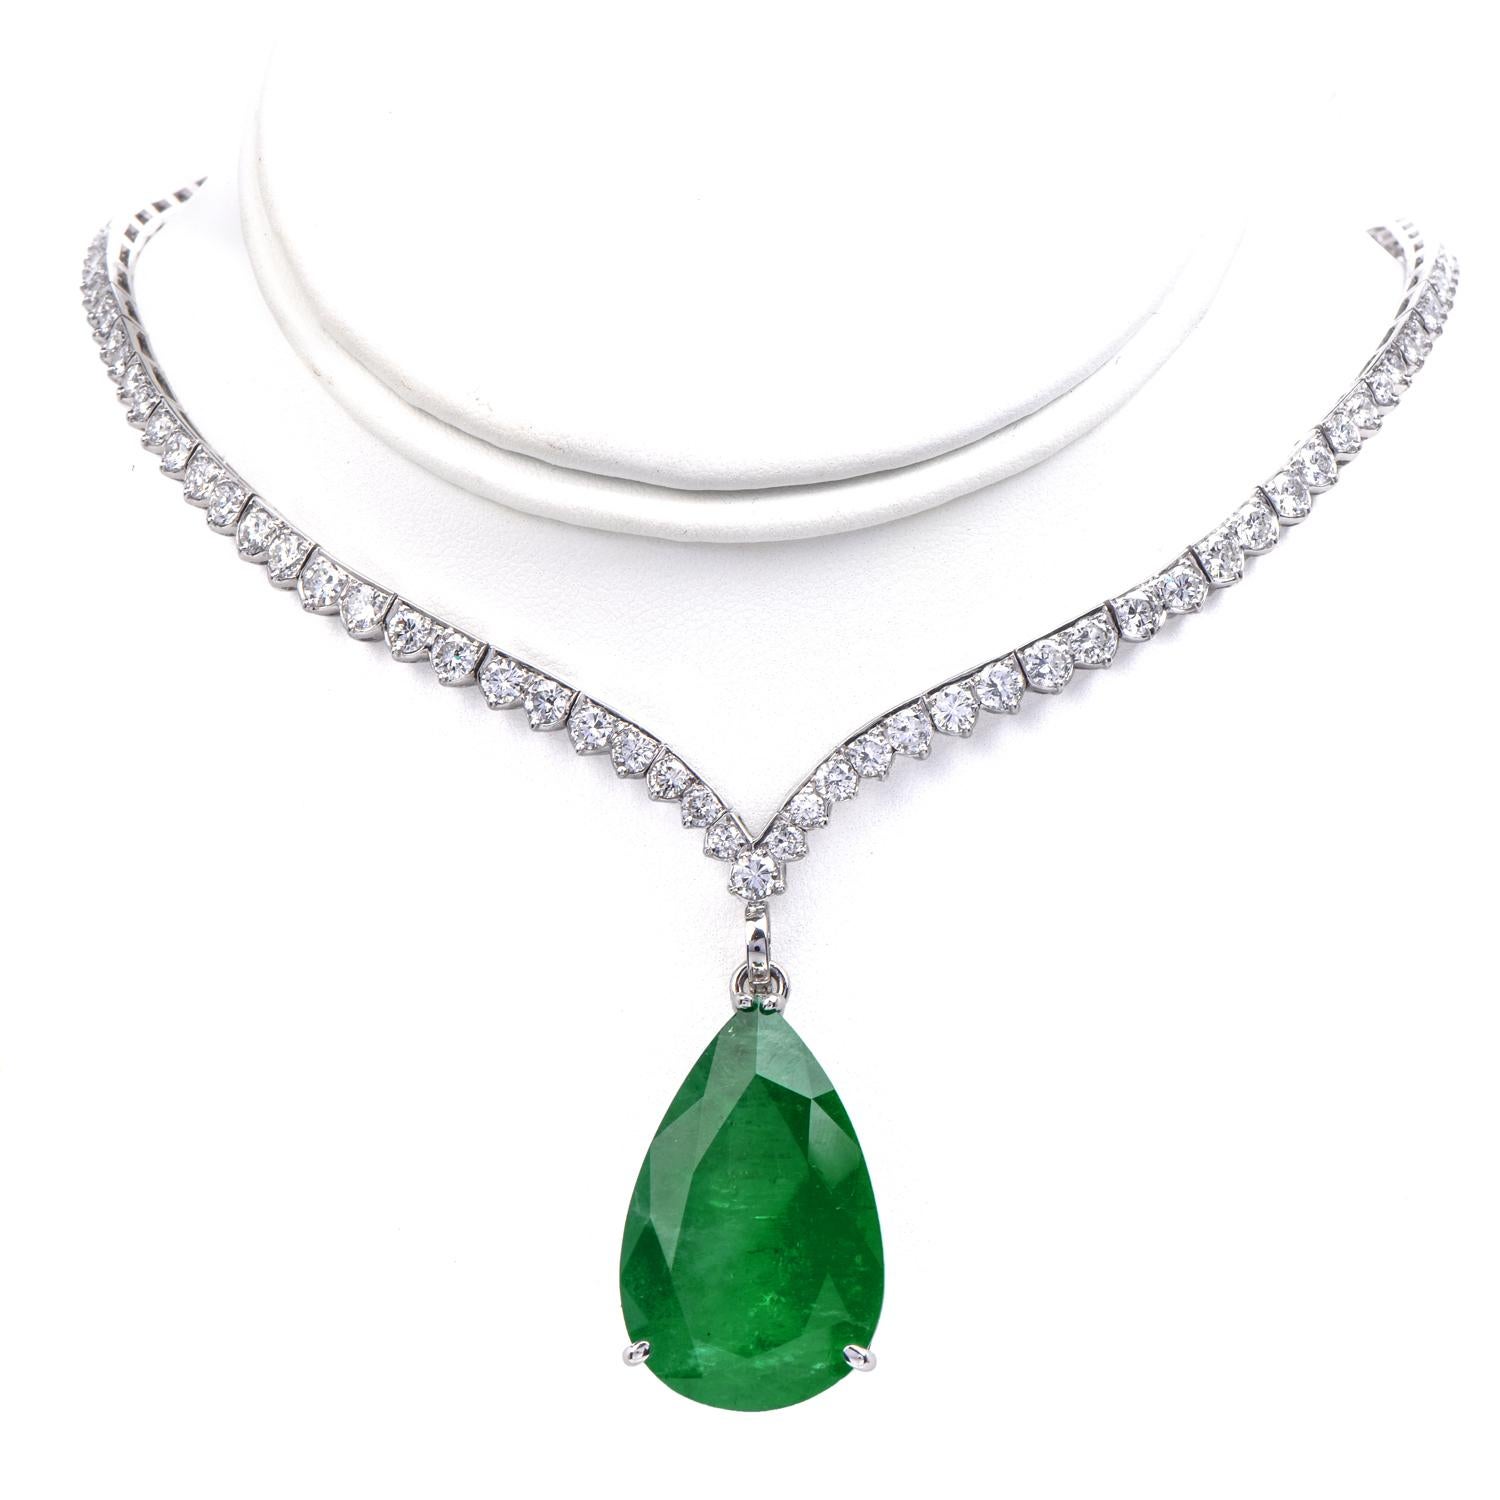 A design inspired by Catherine the great's famous Diamond & Emerald Necklace, this piece will make you feel like a Queen.

The top of the piece is a Diamond V-shaped Necklace simple and elegant, handcrafted in luxurious Platinum.  

Tailored with